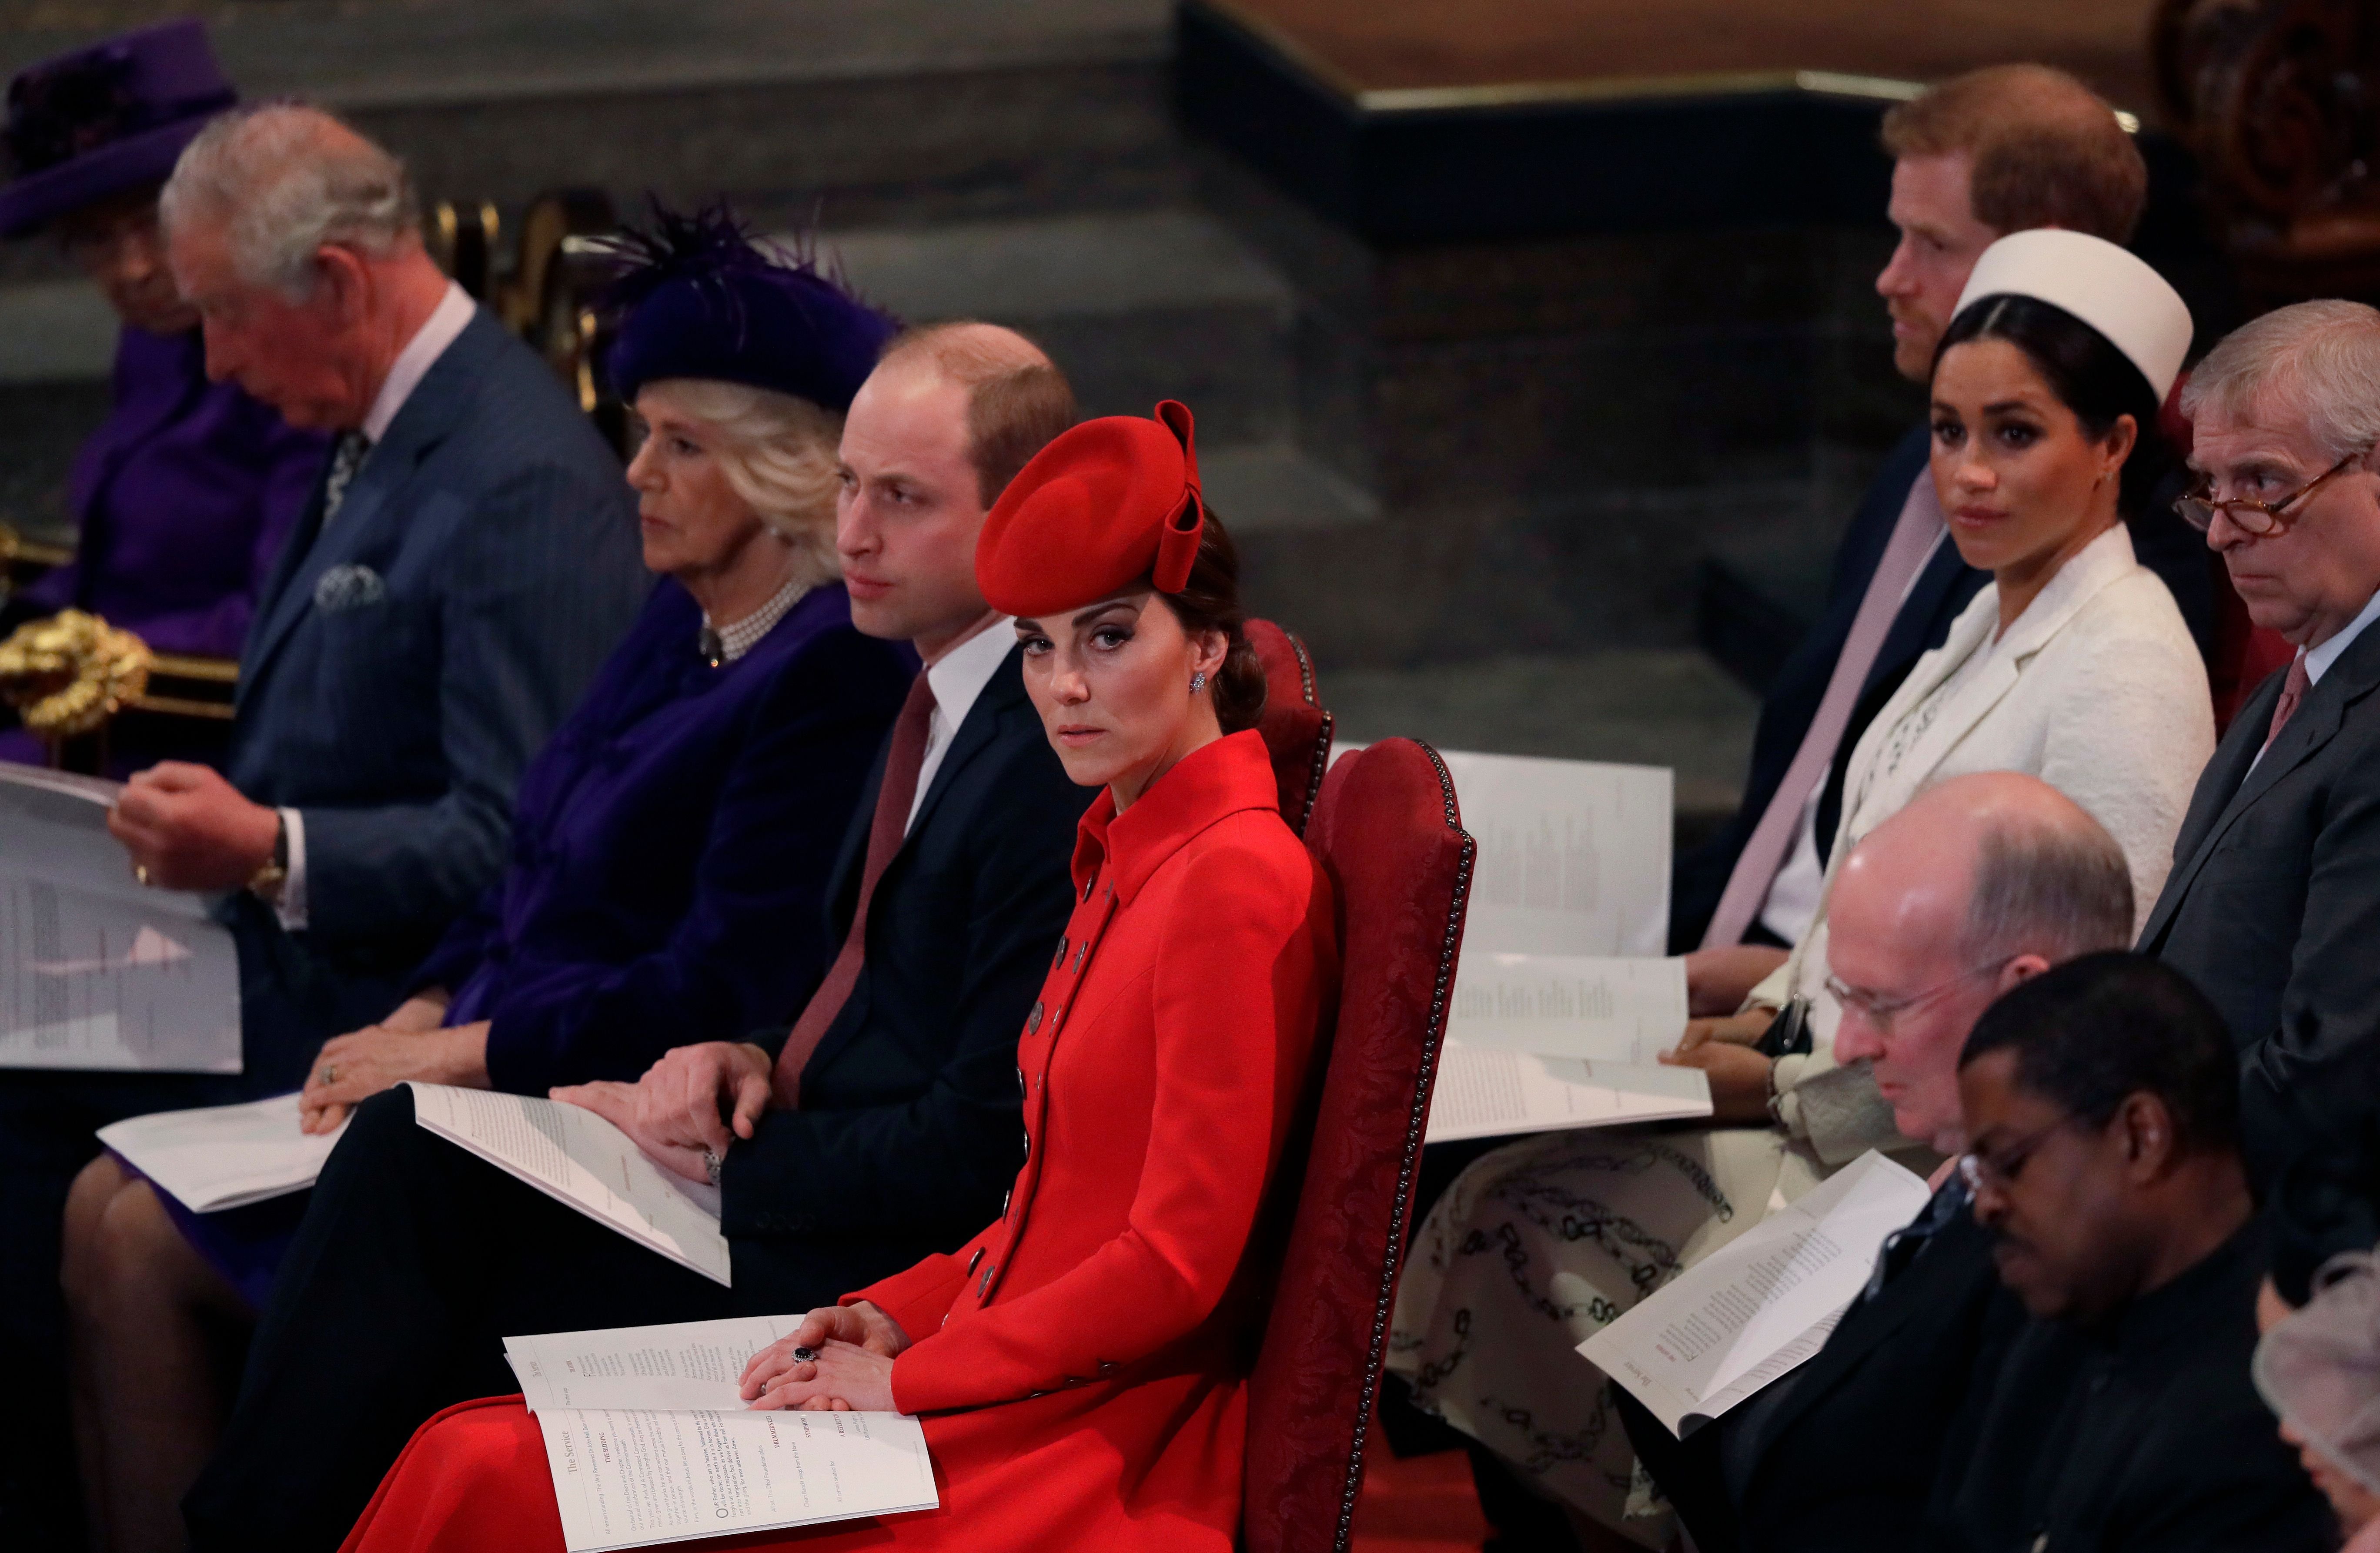 From L-R front row: Prince Charles, Camilla, Prince William, and Kate Middleton with (L-R second row) Prince Harry, Meghan Markle and Prince Andrew, pictured during the Commonwealth Day service on March 11, 2019 at Westminster Abbey in London. / Source: Getty Images